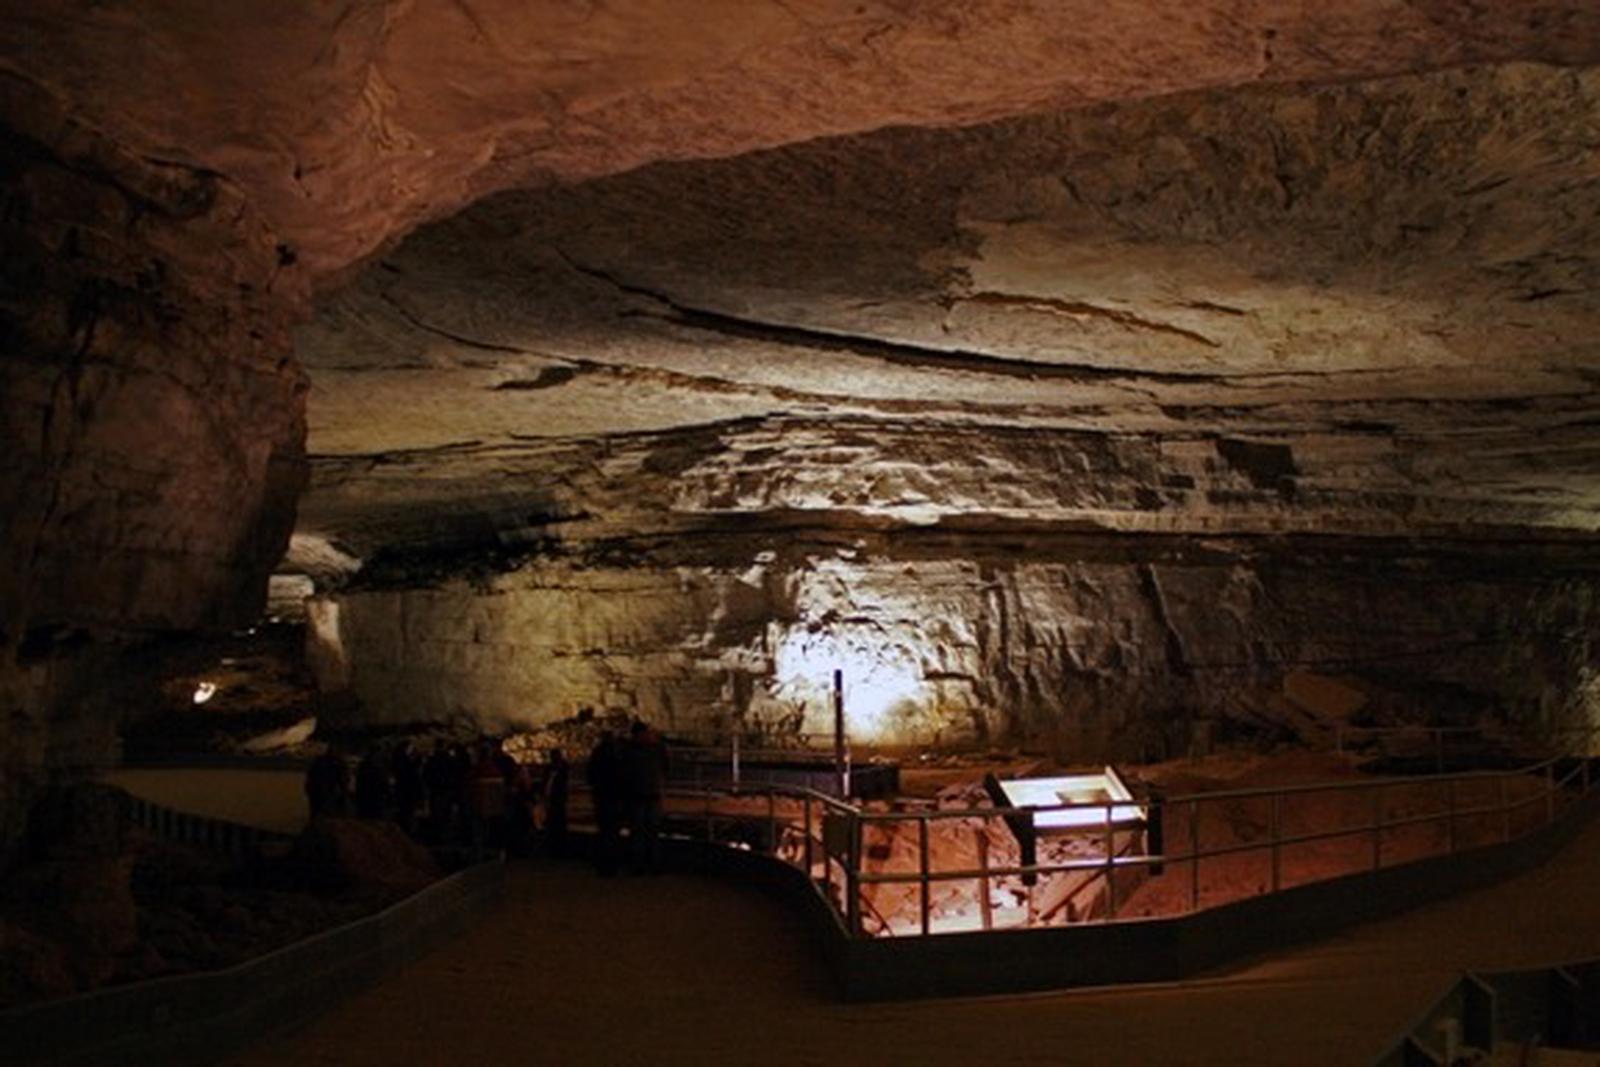  The Rotunda, the fifth largest room in the cave with a view of the saltpetre mining artifacts  The Rotunda on the River Styx Tour route.